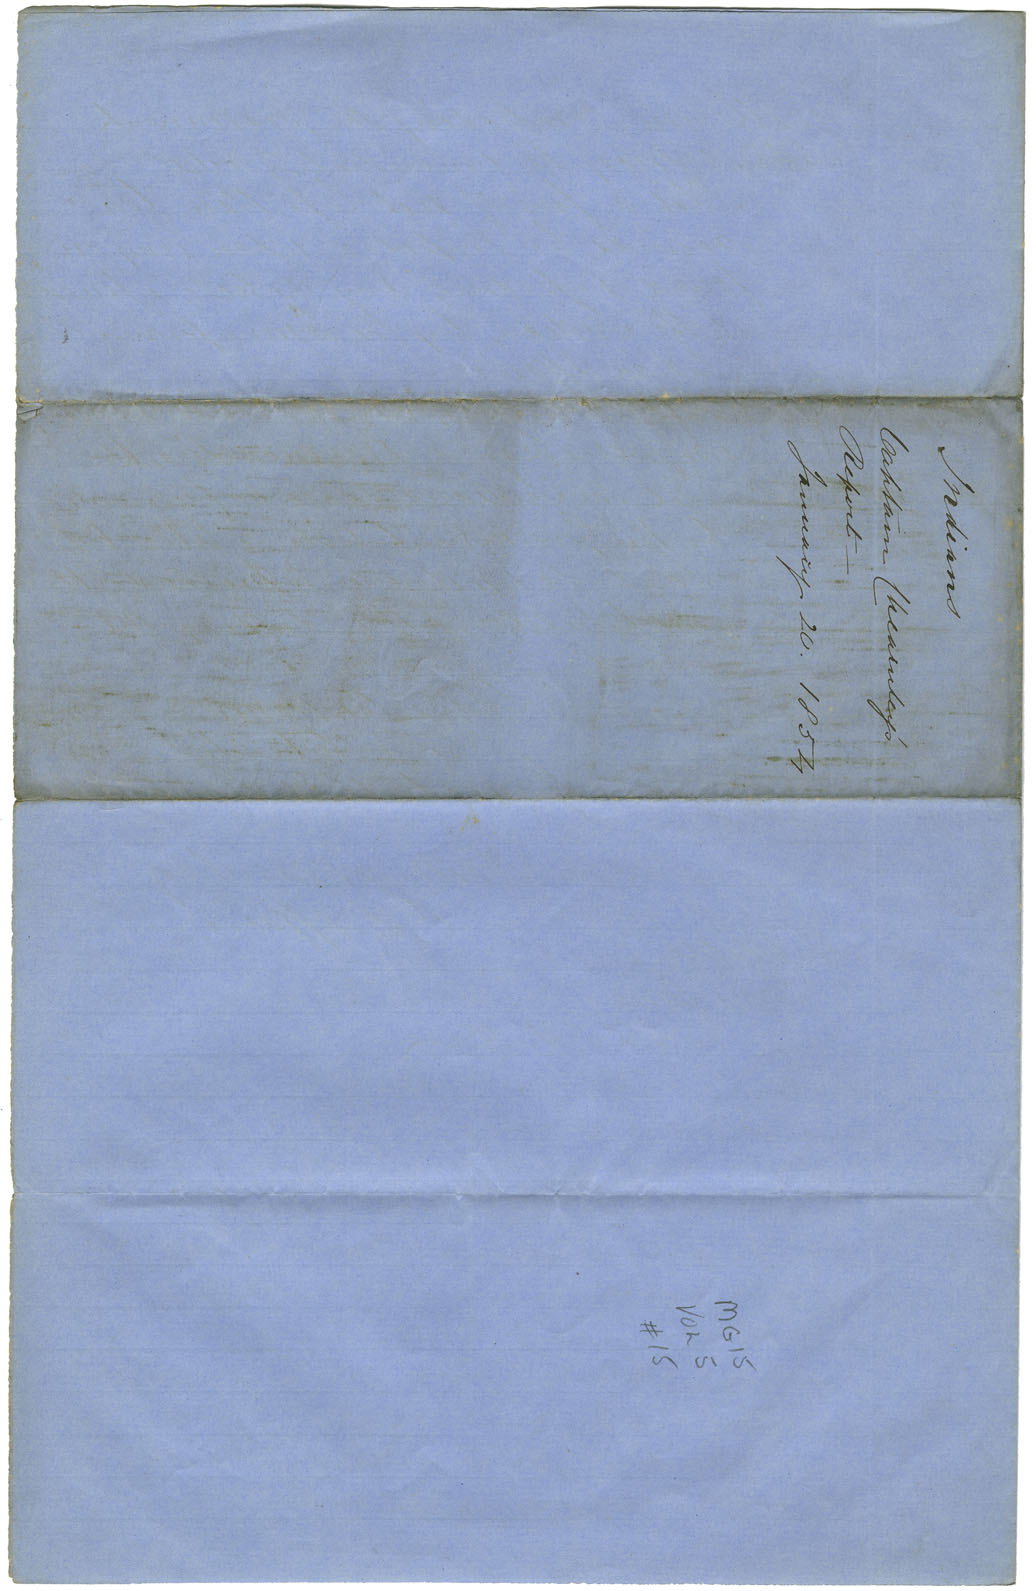 Report for 1853 of William Chearnley, Commissioner of Indian Affairs.